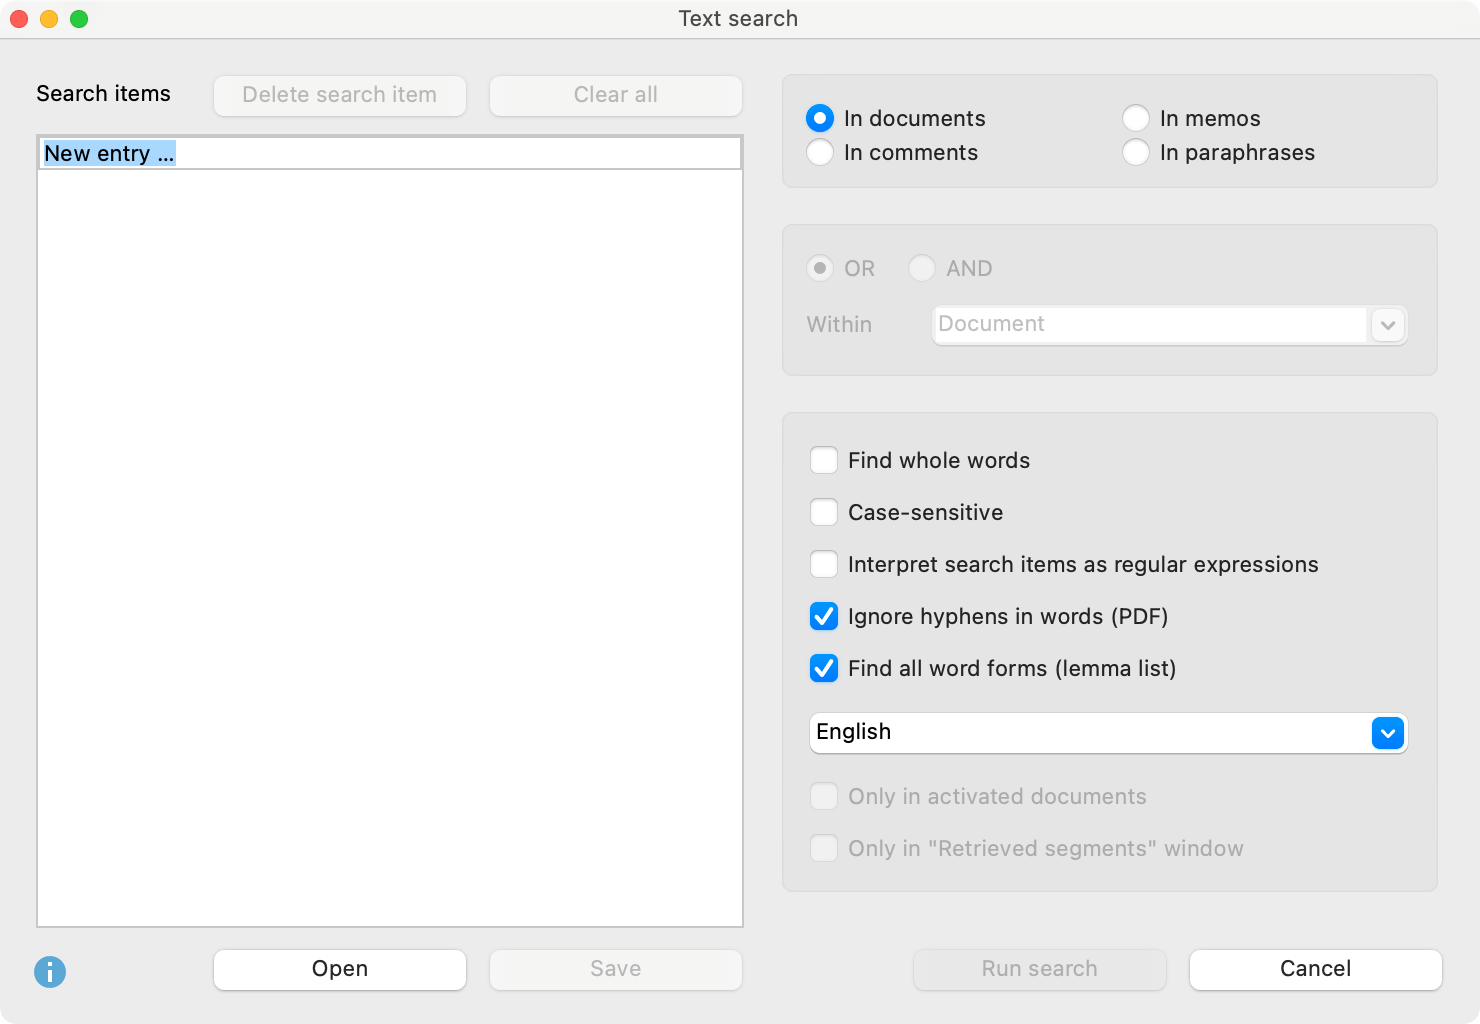 The dialog window for the Text Search